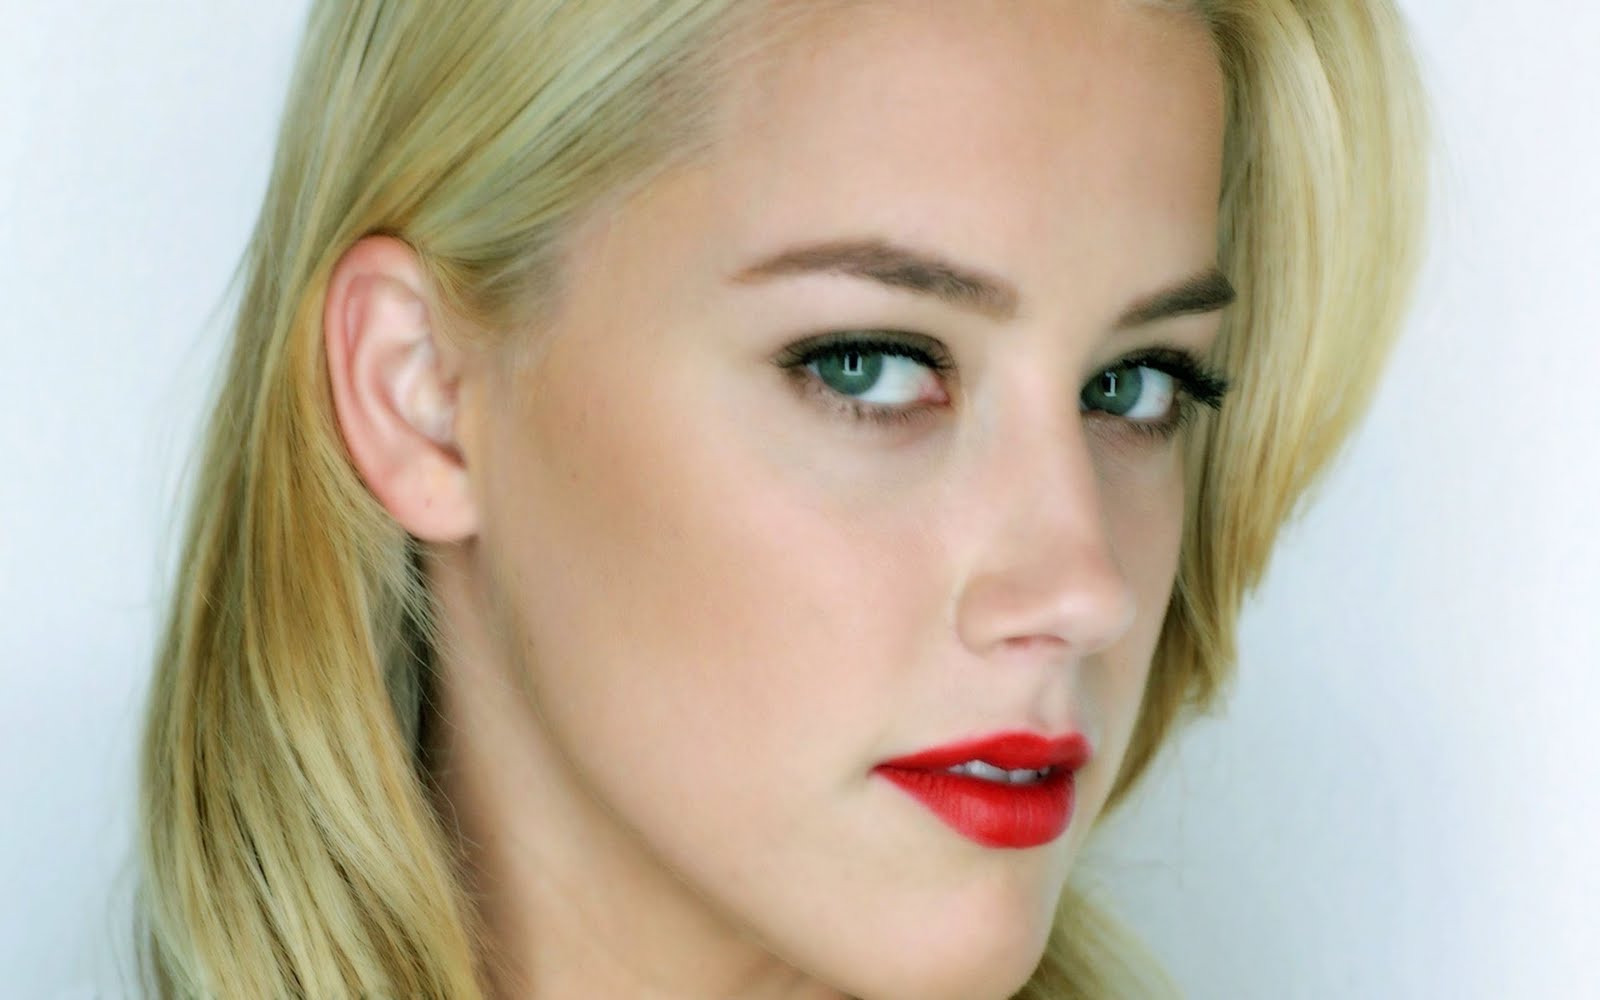 Amber Heard Images, Wallpaper, High Quality Pictures, 